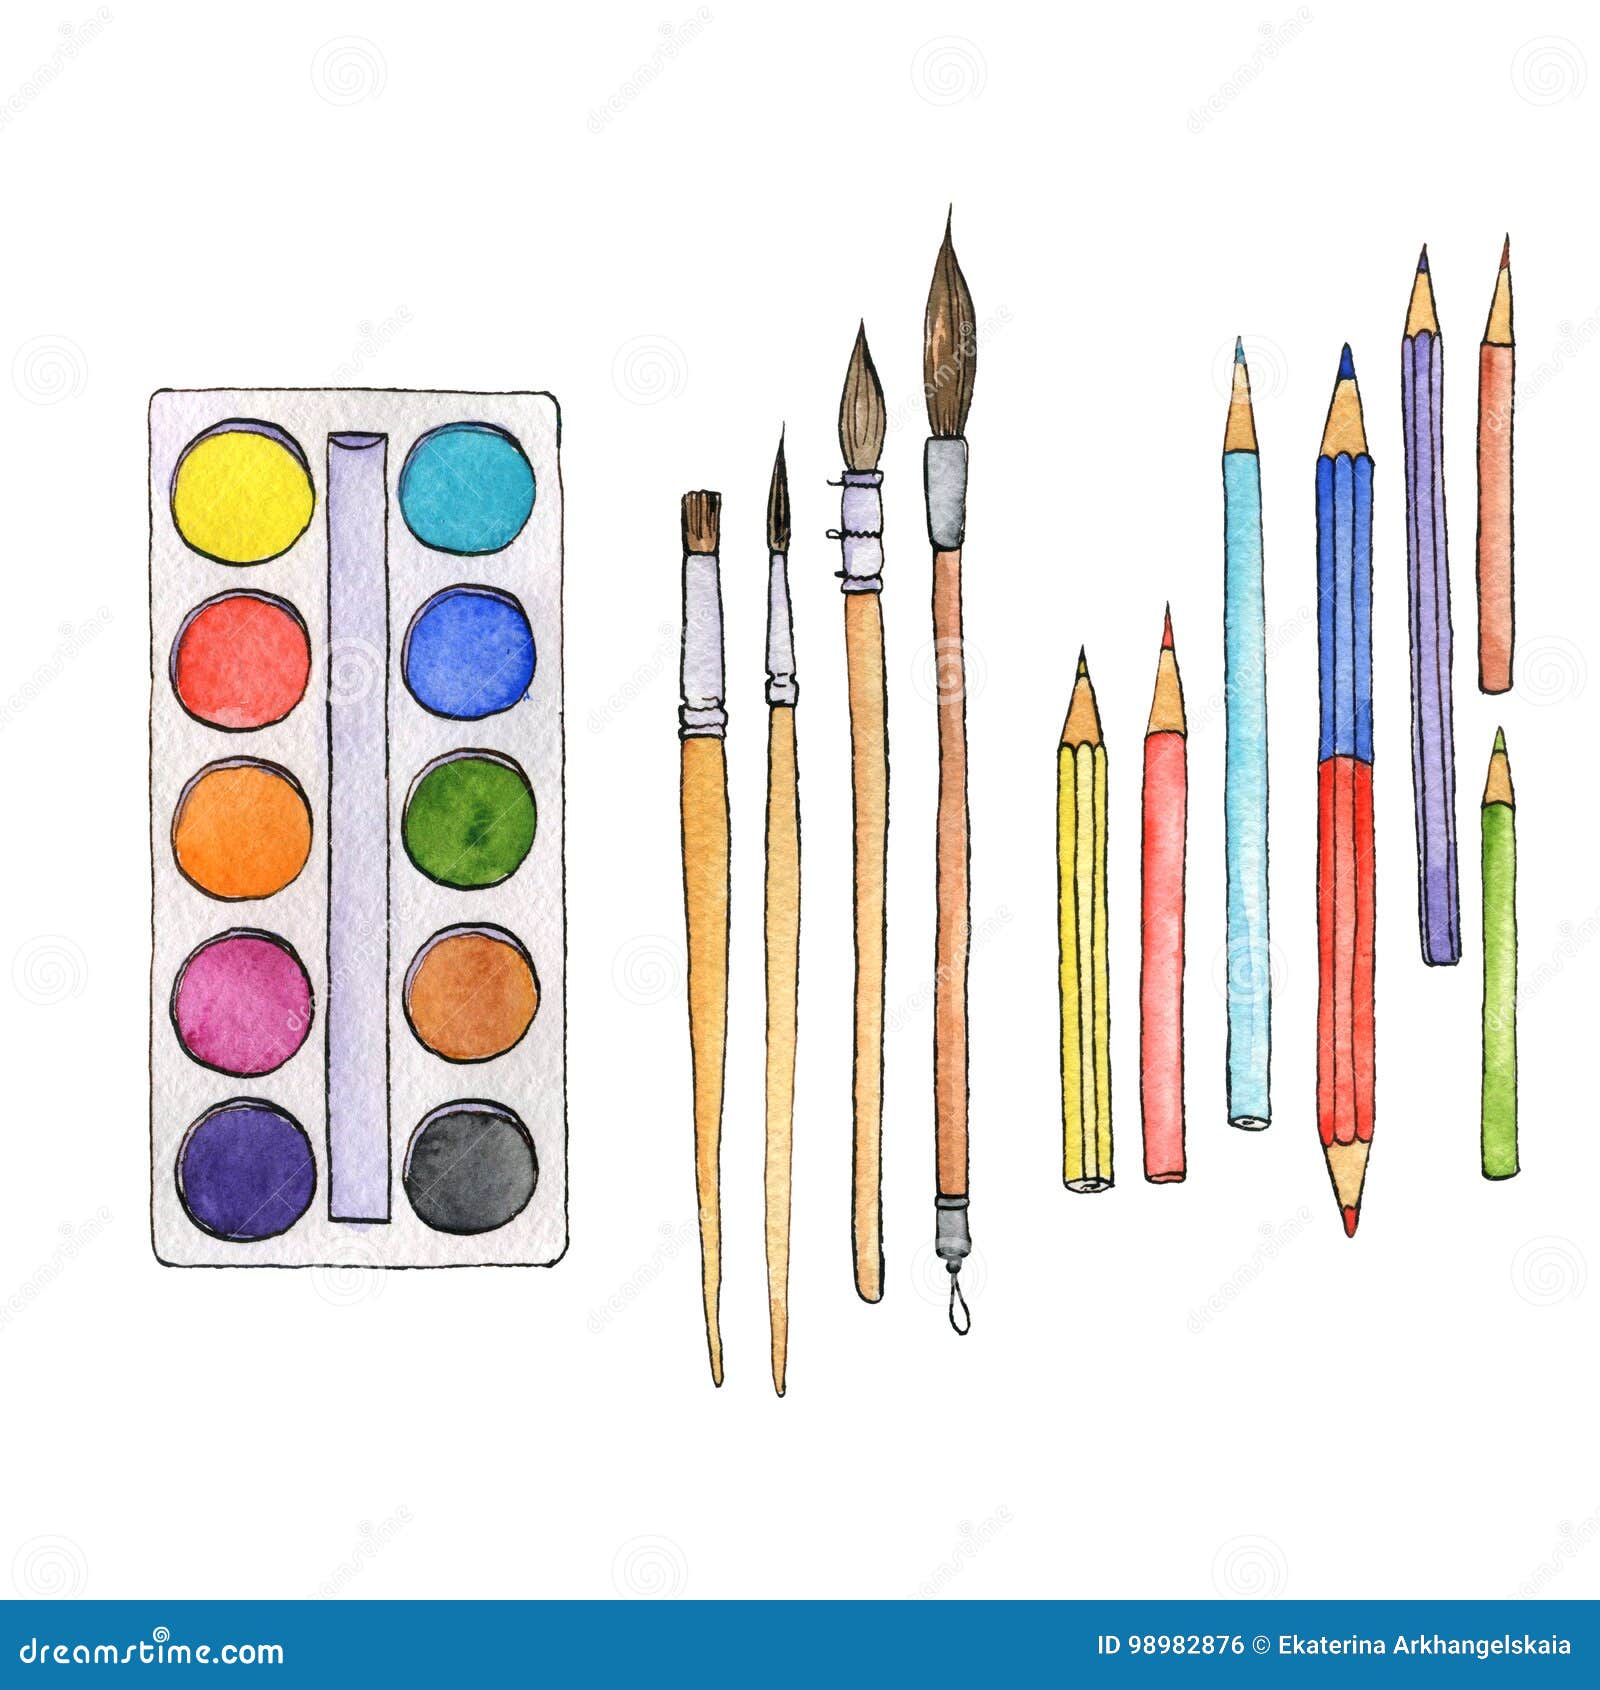 stationery, art materials, set of paint brushes